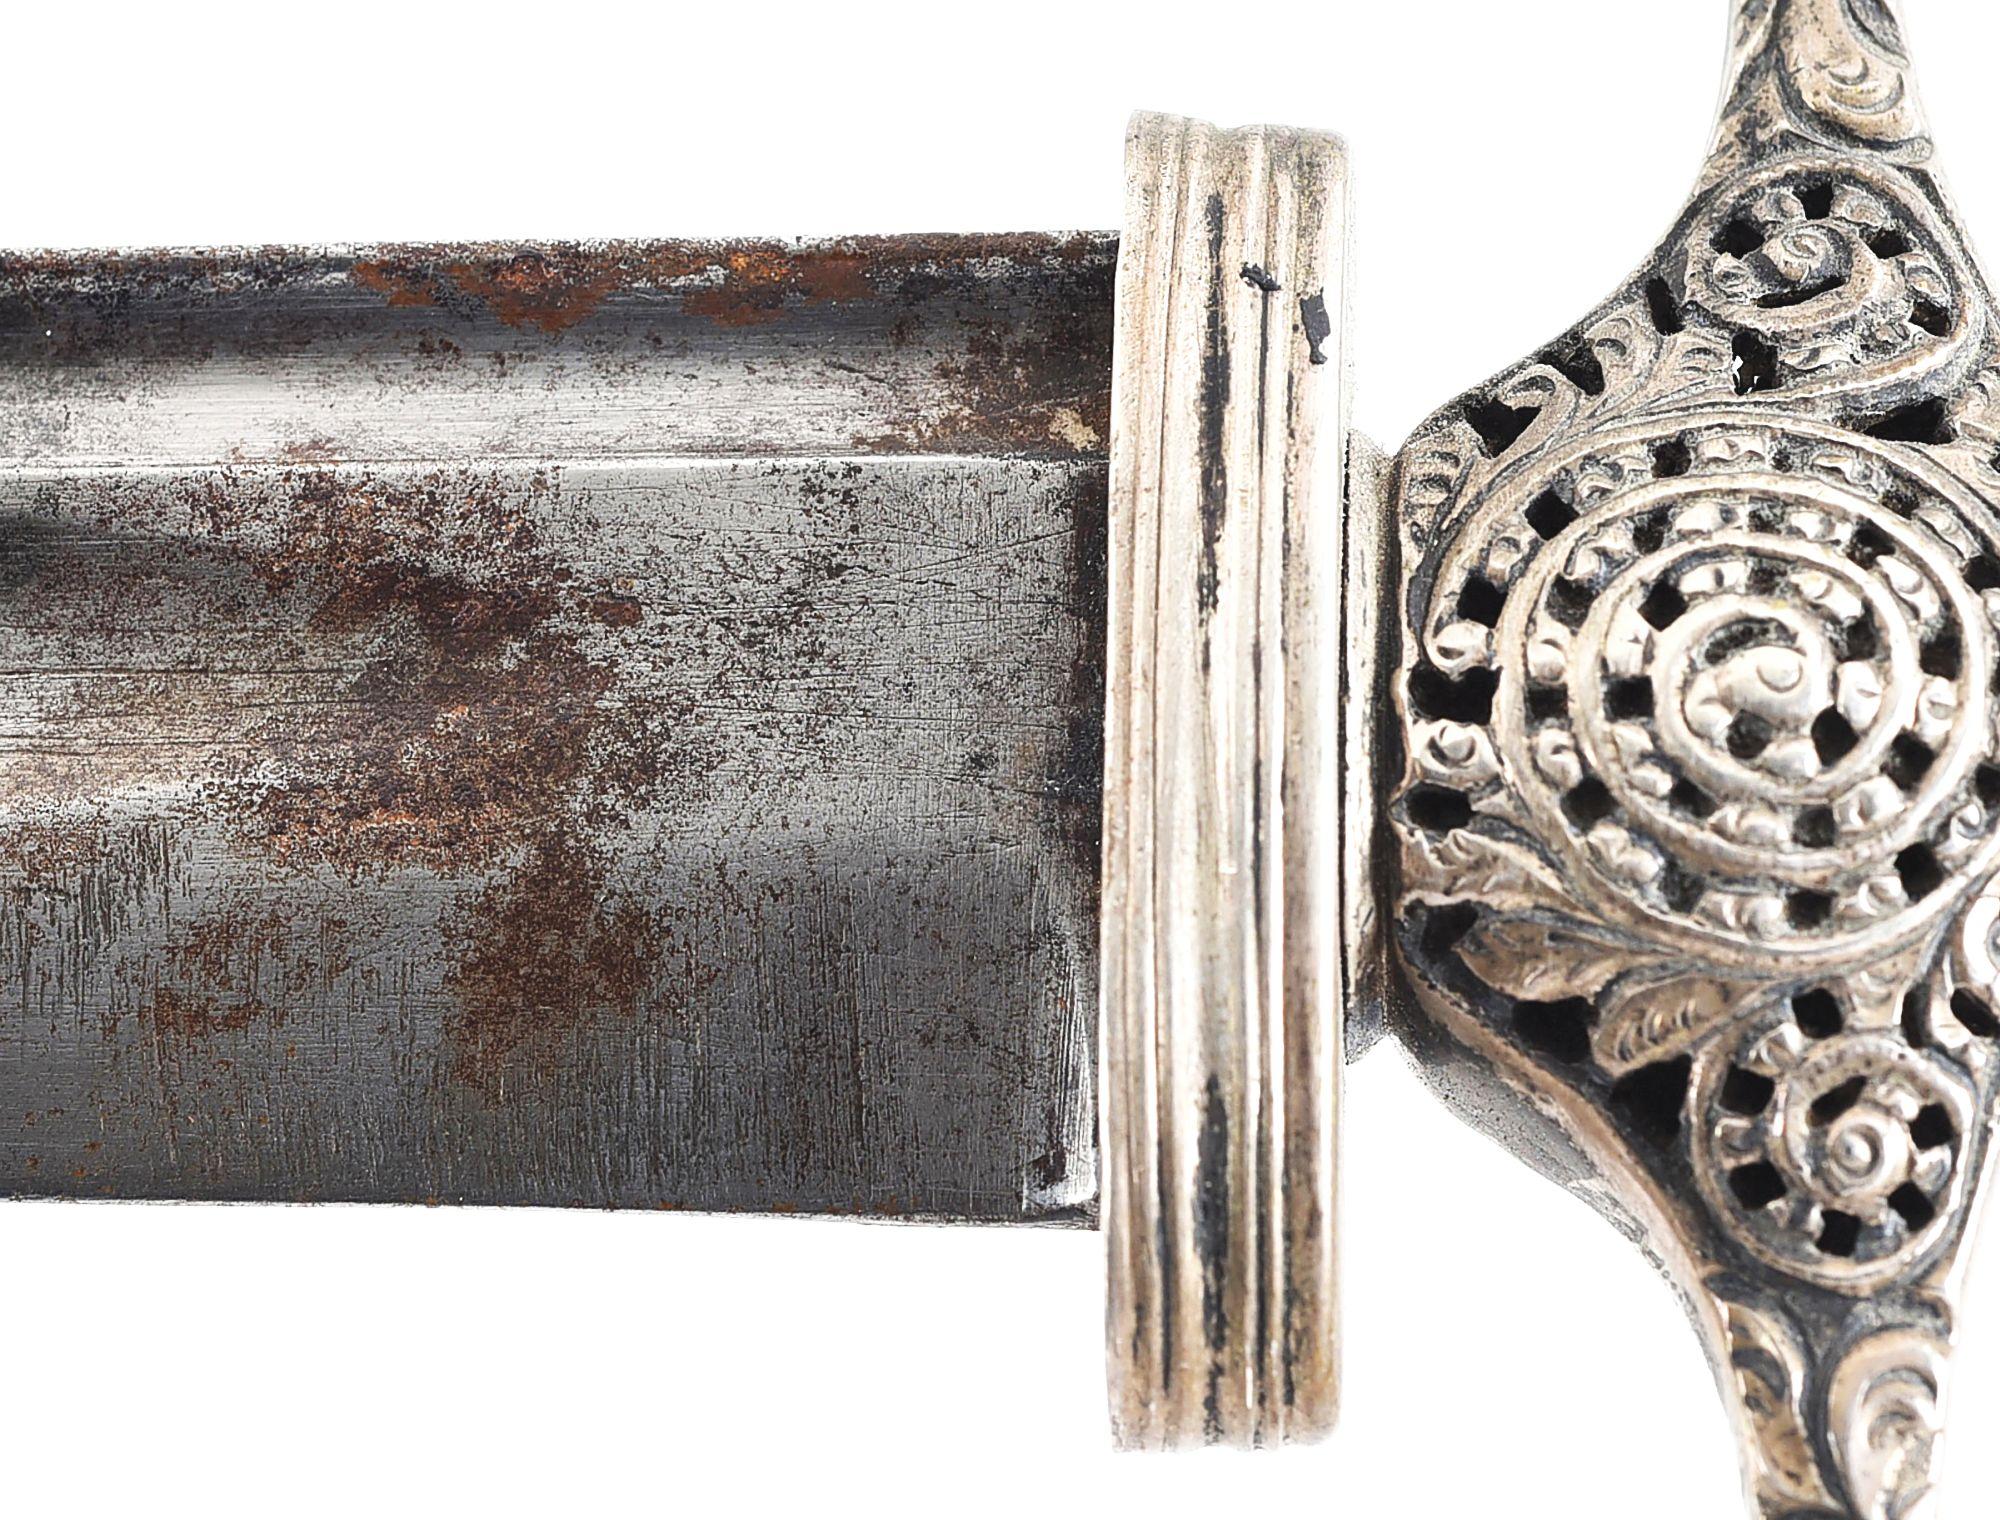 18TH CENTURY SILVER-HILTED EAGLE HEAD POMMEL SWORD WITH SCABBARD.